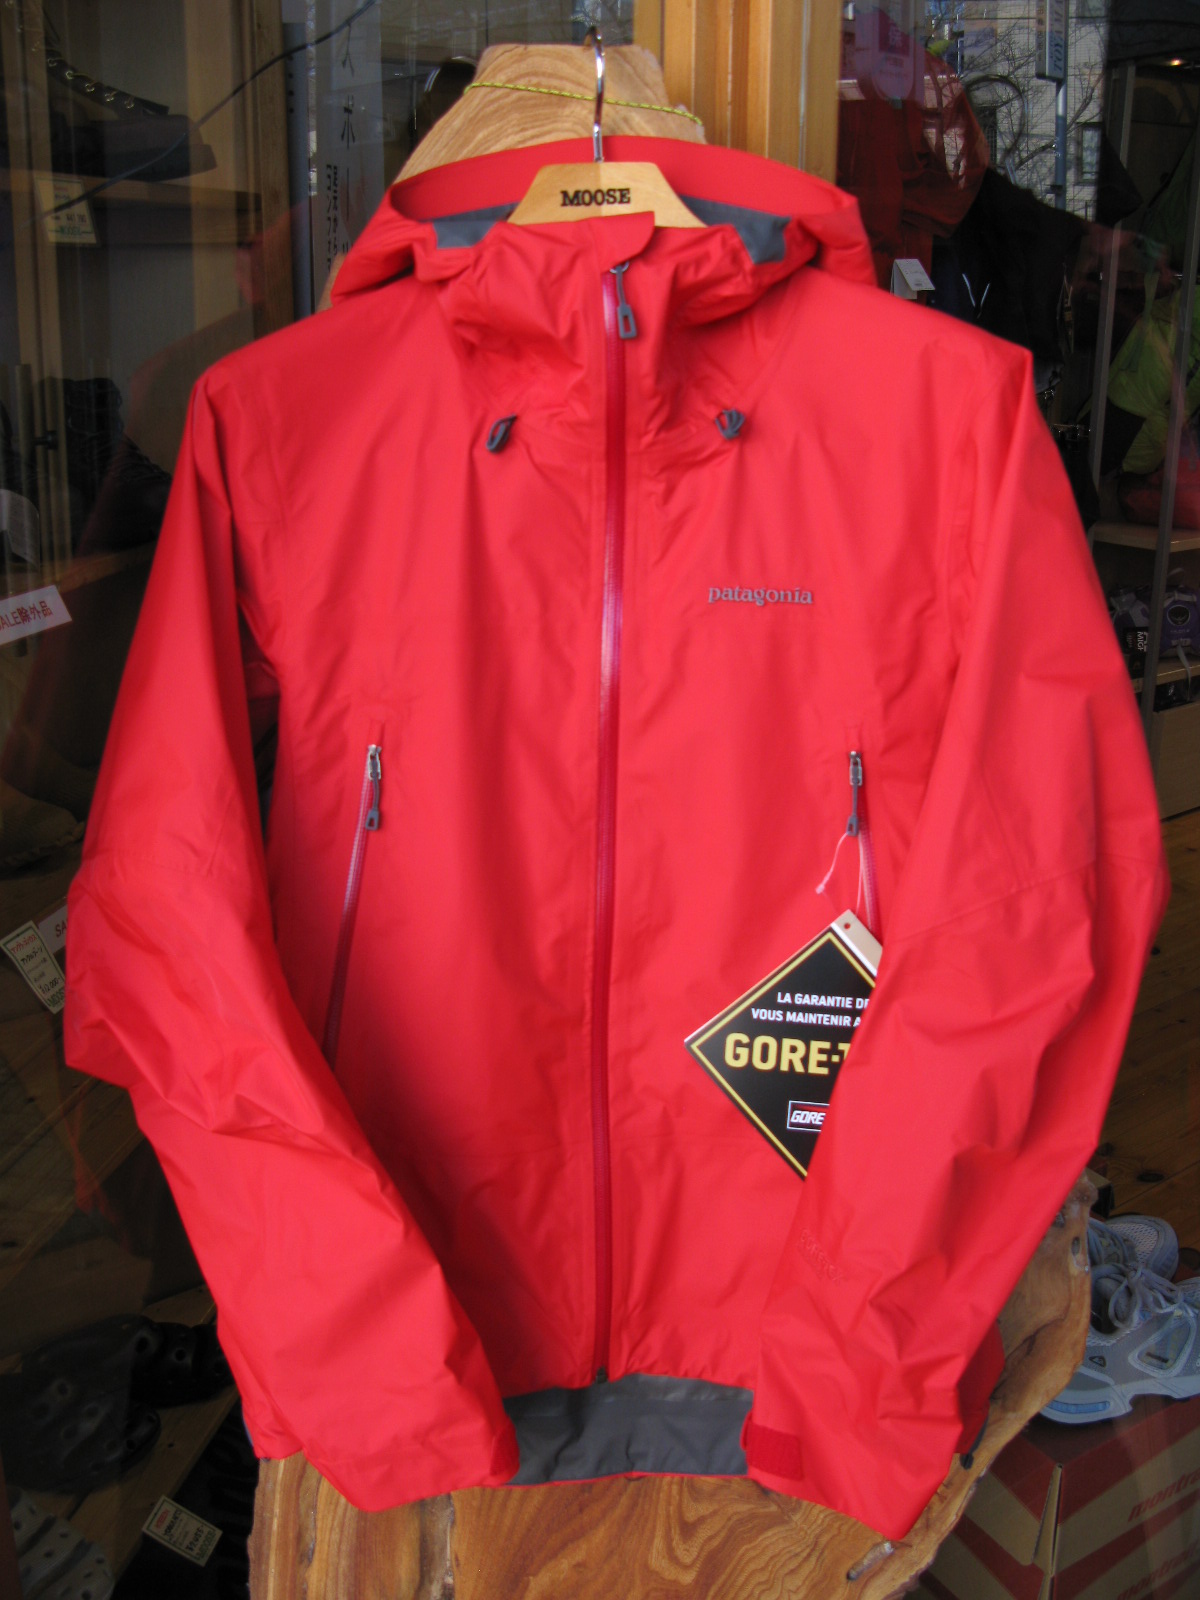 Patagonia Super Cell Jacket : OUTDOOR SHOP MOOSE ブログ